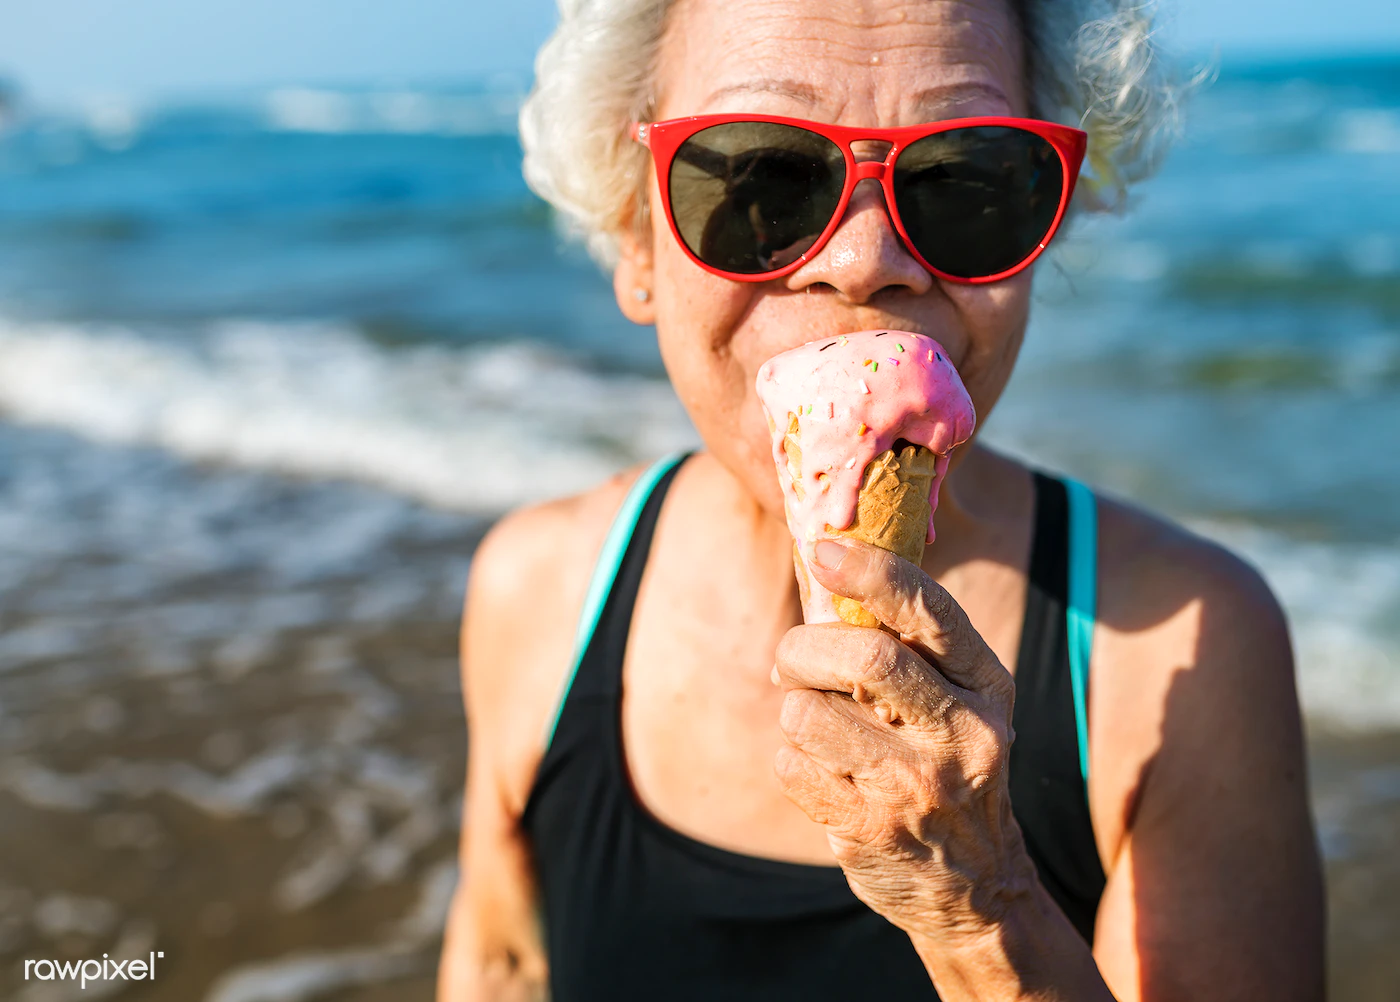 elderly person with dentures eating ice cream